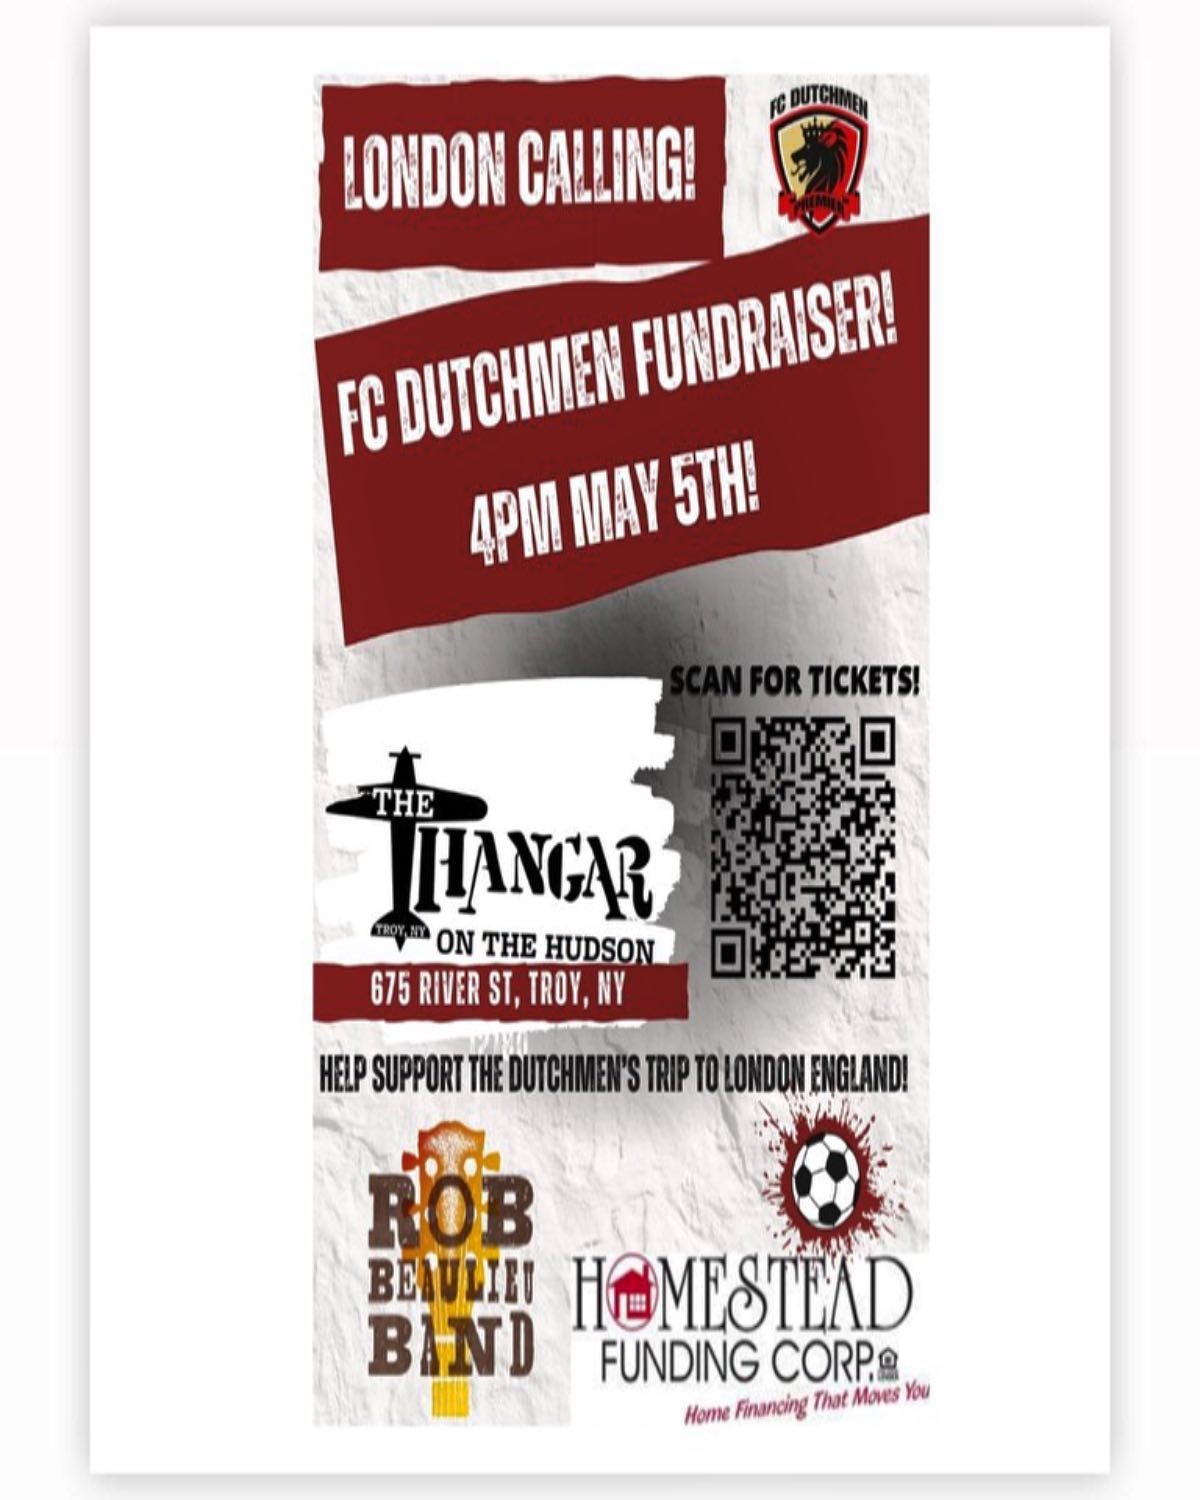 May 5th! Come help support the FC Dutchmen&rsquo;s trip to London! The kids worked hard to get here and we want to come together to support their travels. The Rob Beaulieu Band will be playing at The Hangar on the Hudson next Sunday at 4pm. There wil